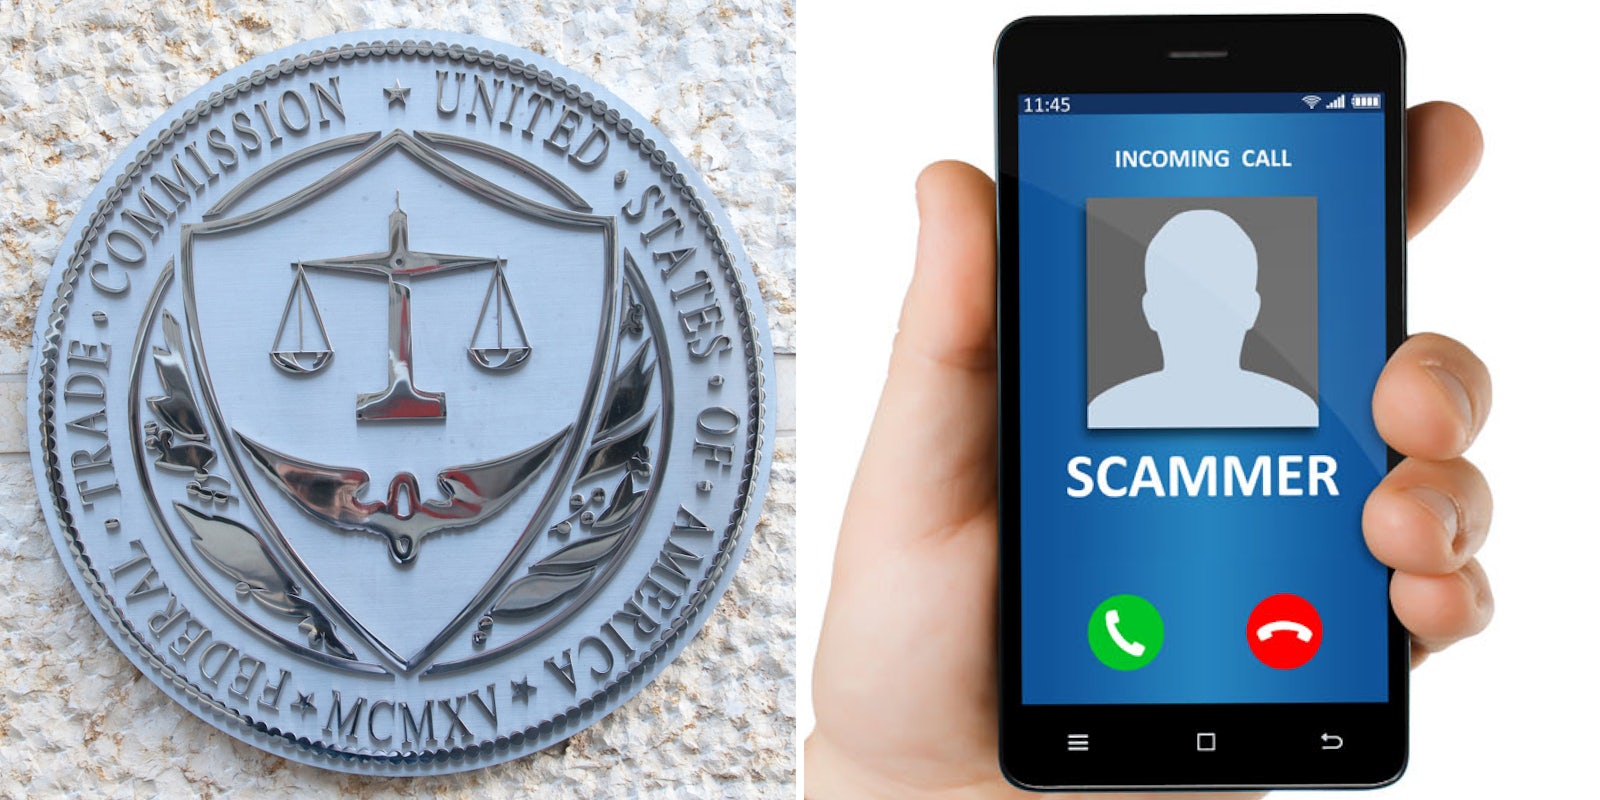 Federal Trade Commission circular plaque on white wall (l) Hand holding phone that says 'INCOMING CALL' 'SCAMMER' (r)